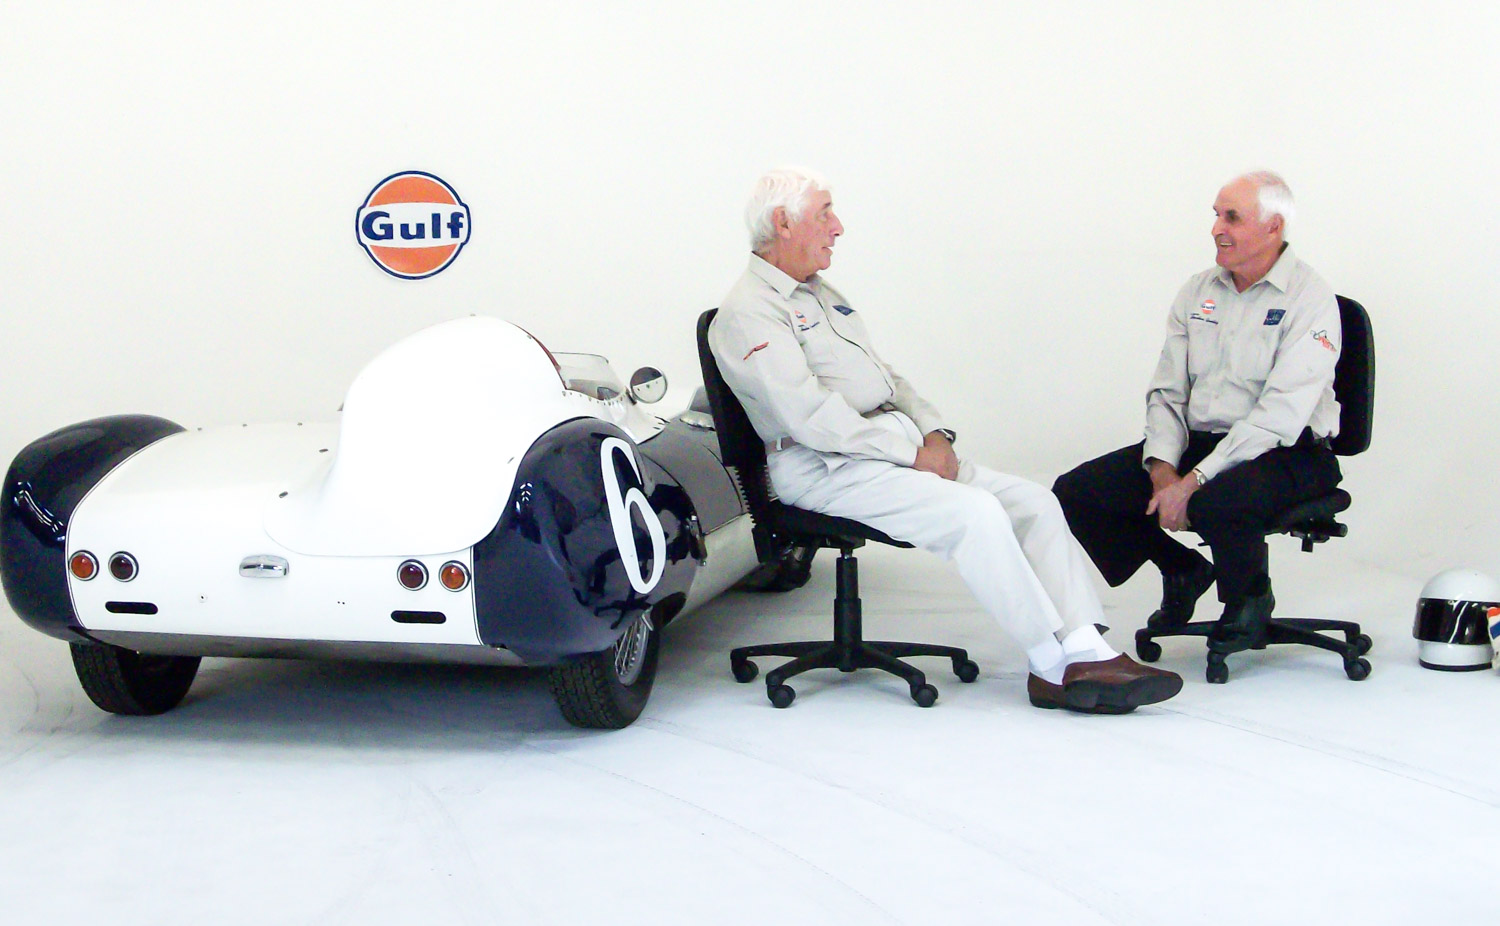 Howden discusses fast cars and motorsport with Jim Barclay (right), the director of the NZ Festival of Motor Racing